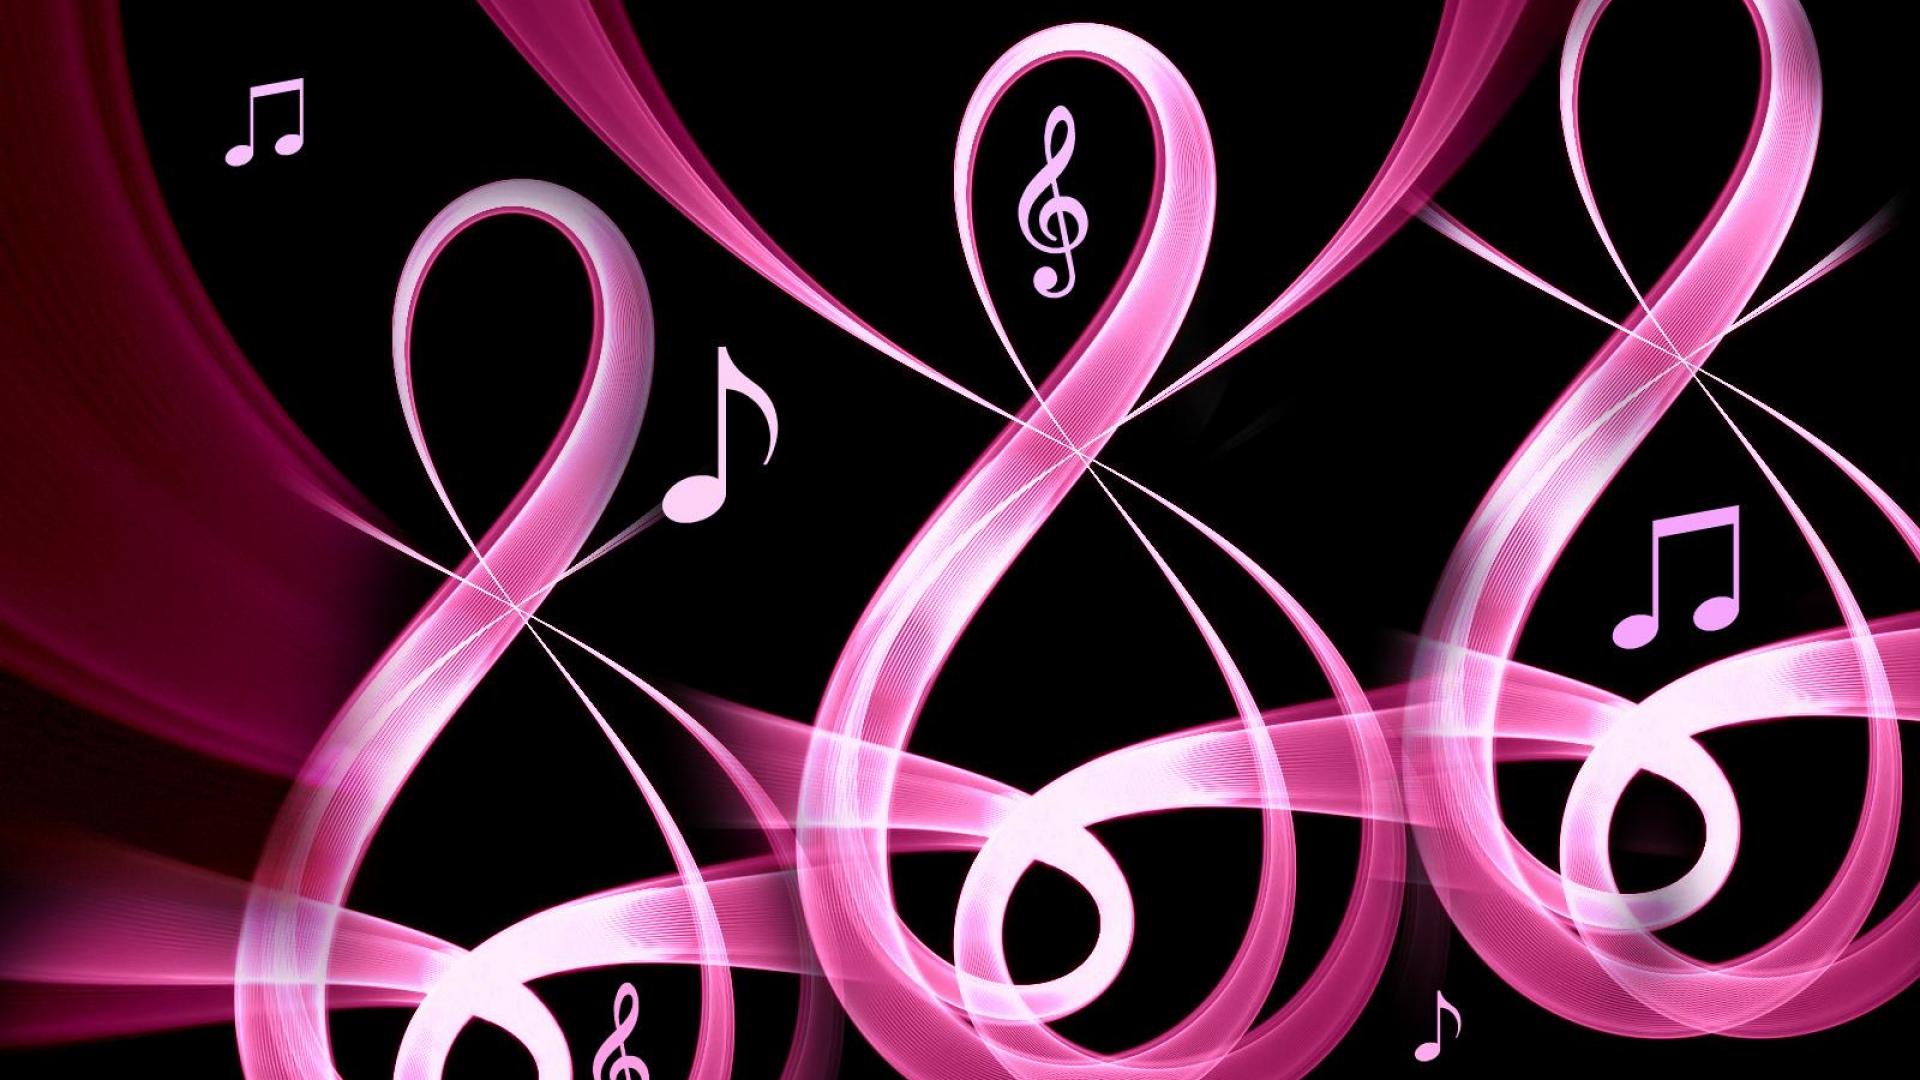 music notes wallpaper hd,pink,text,graphic design,pattern,font